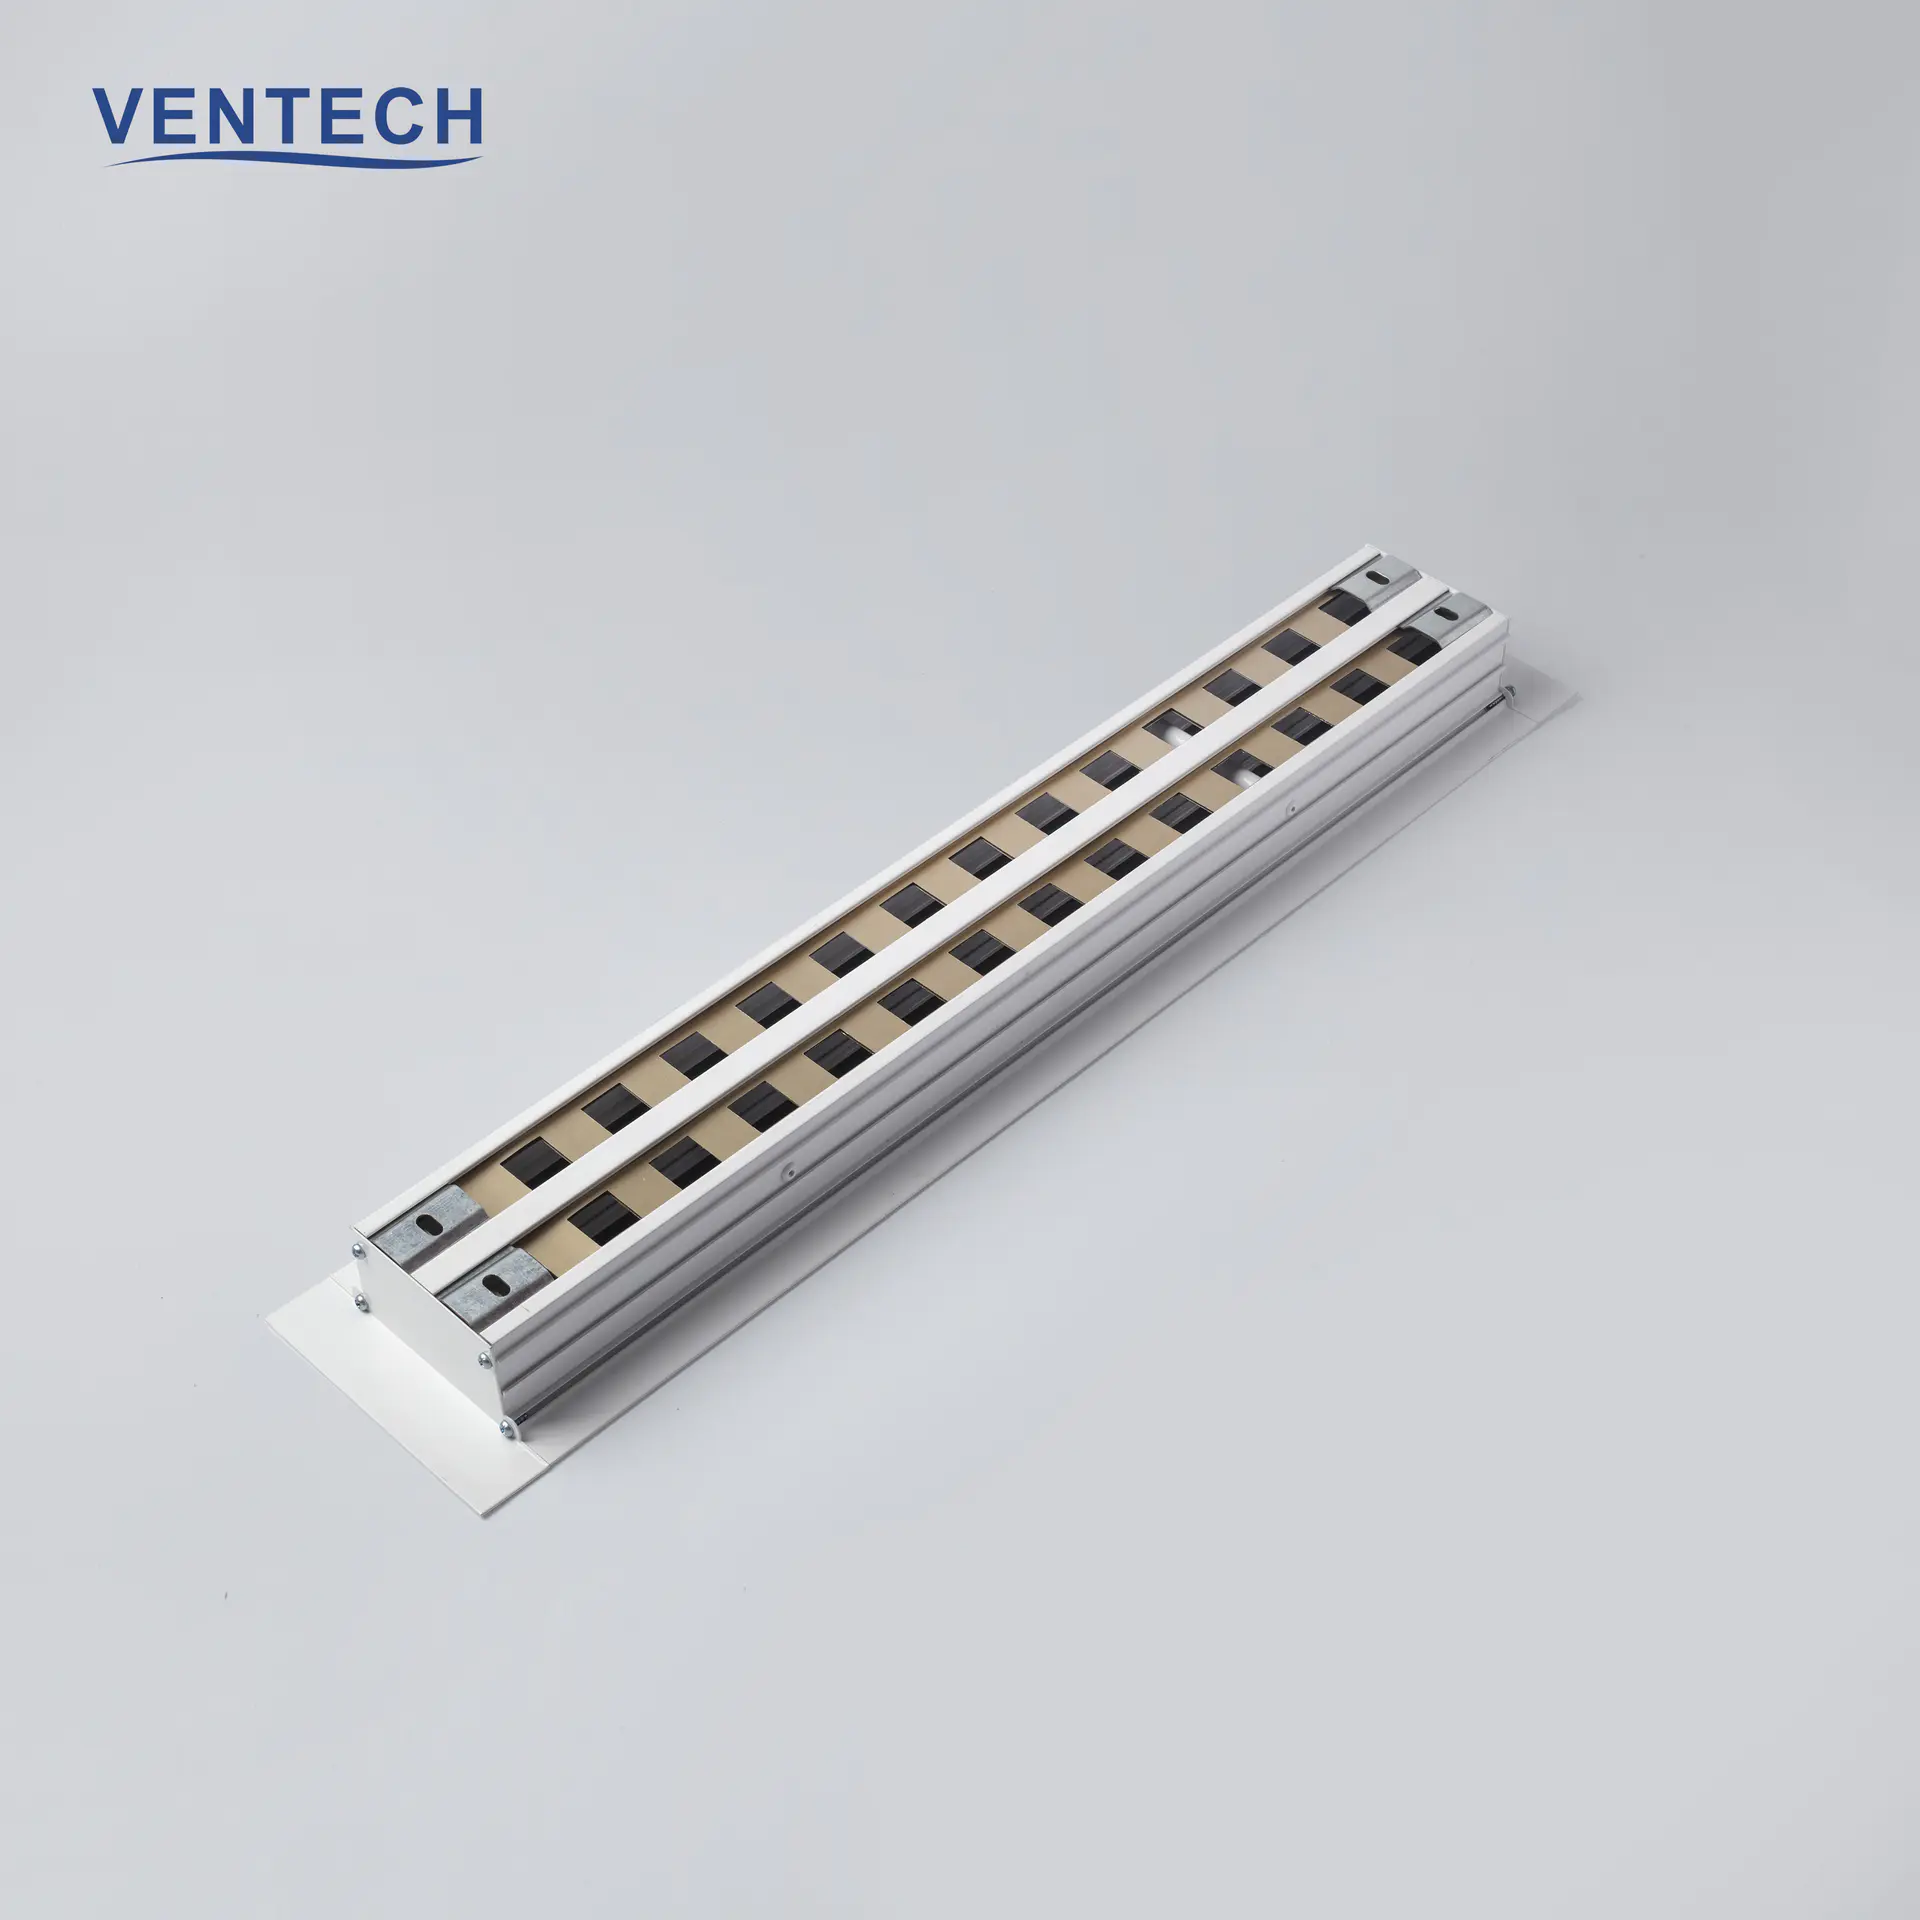 HVAC duct grill exhaust air linear slot diffuser